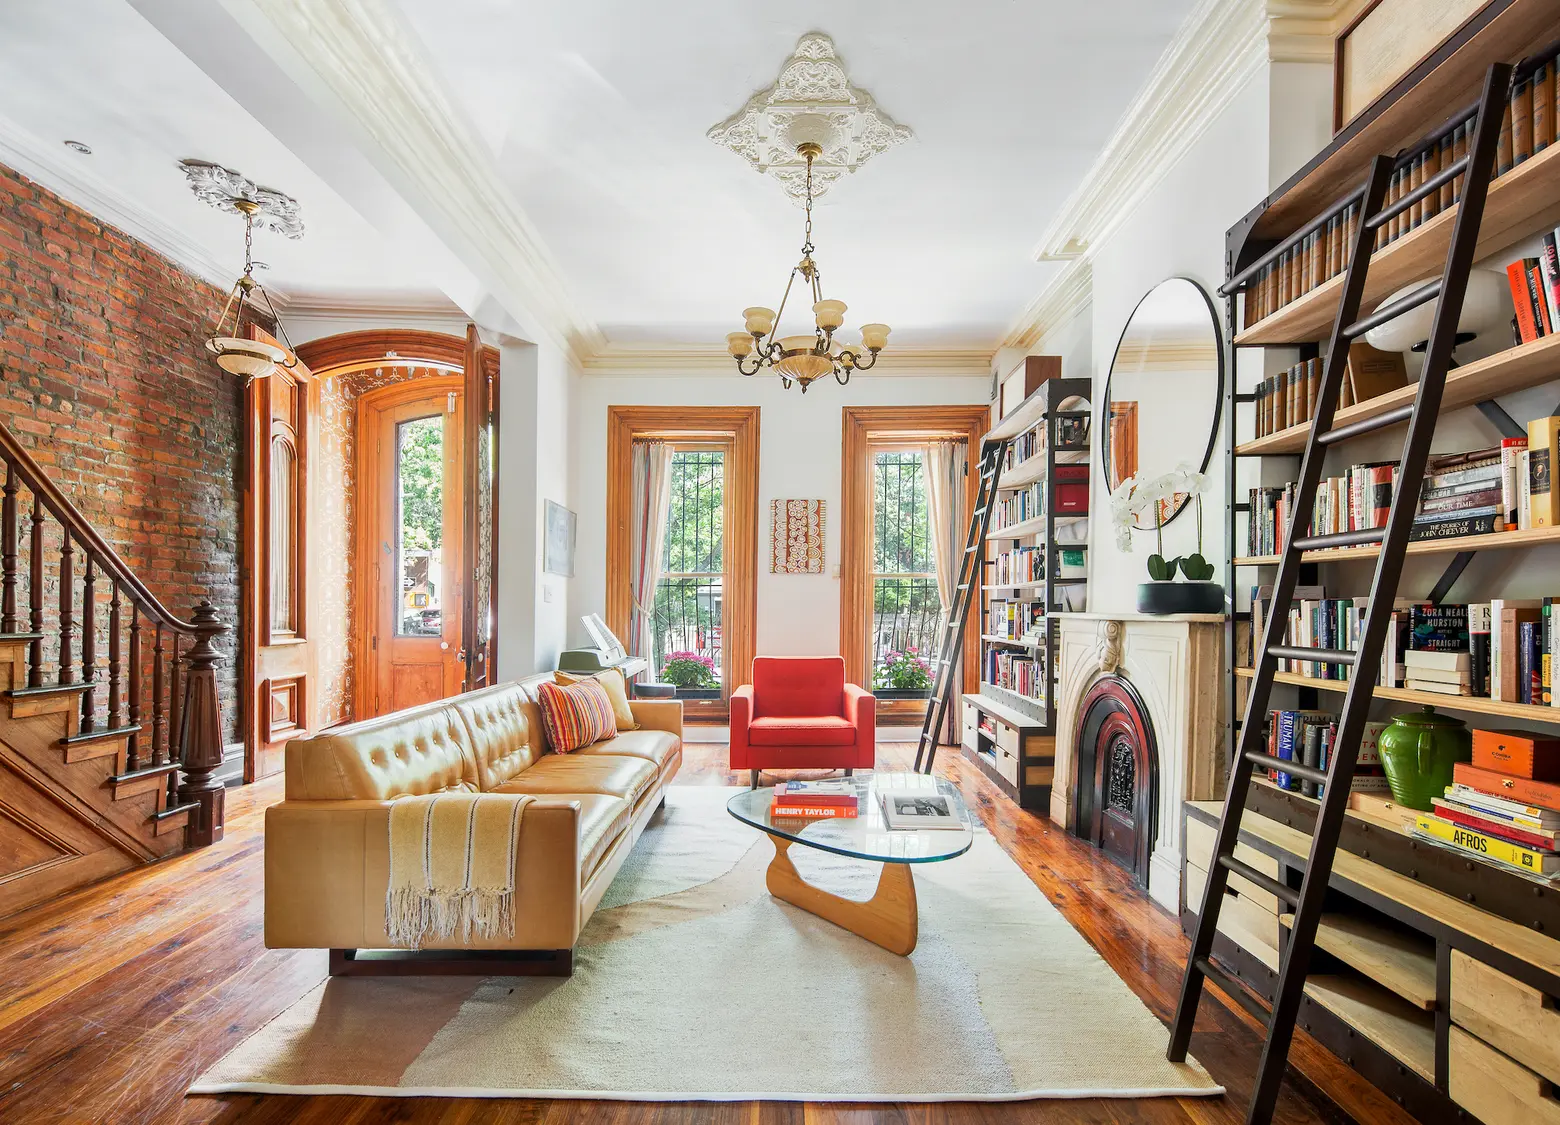 For $3.3M, this turn-key Clinton Hill townhouse is light-filled and lovely, with historic charm intact